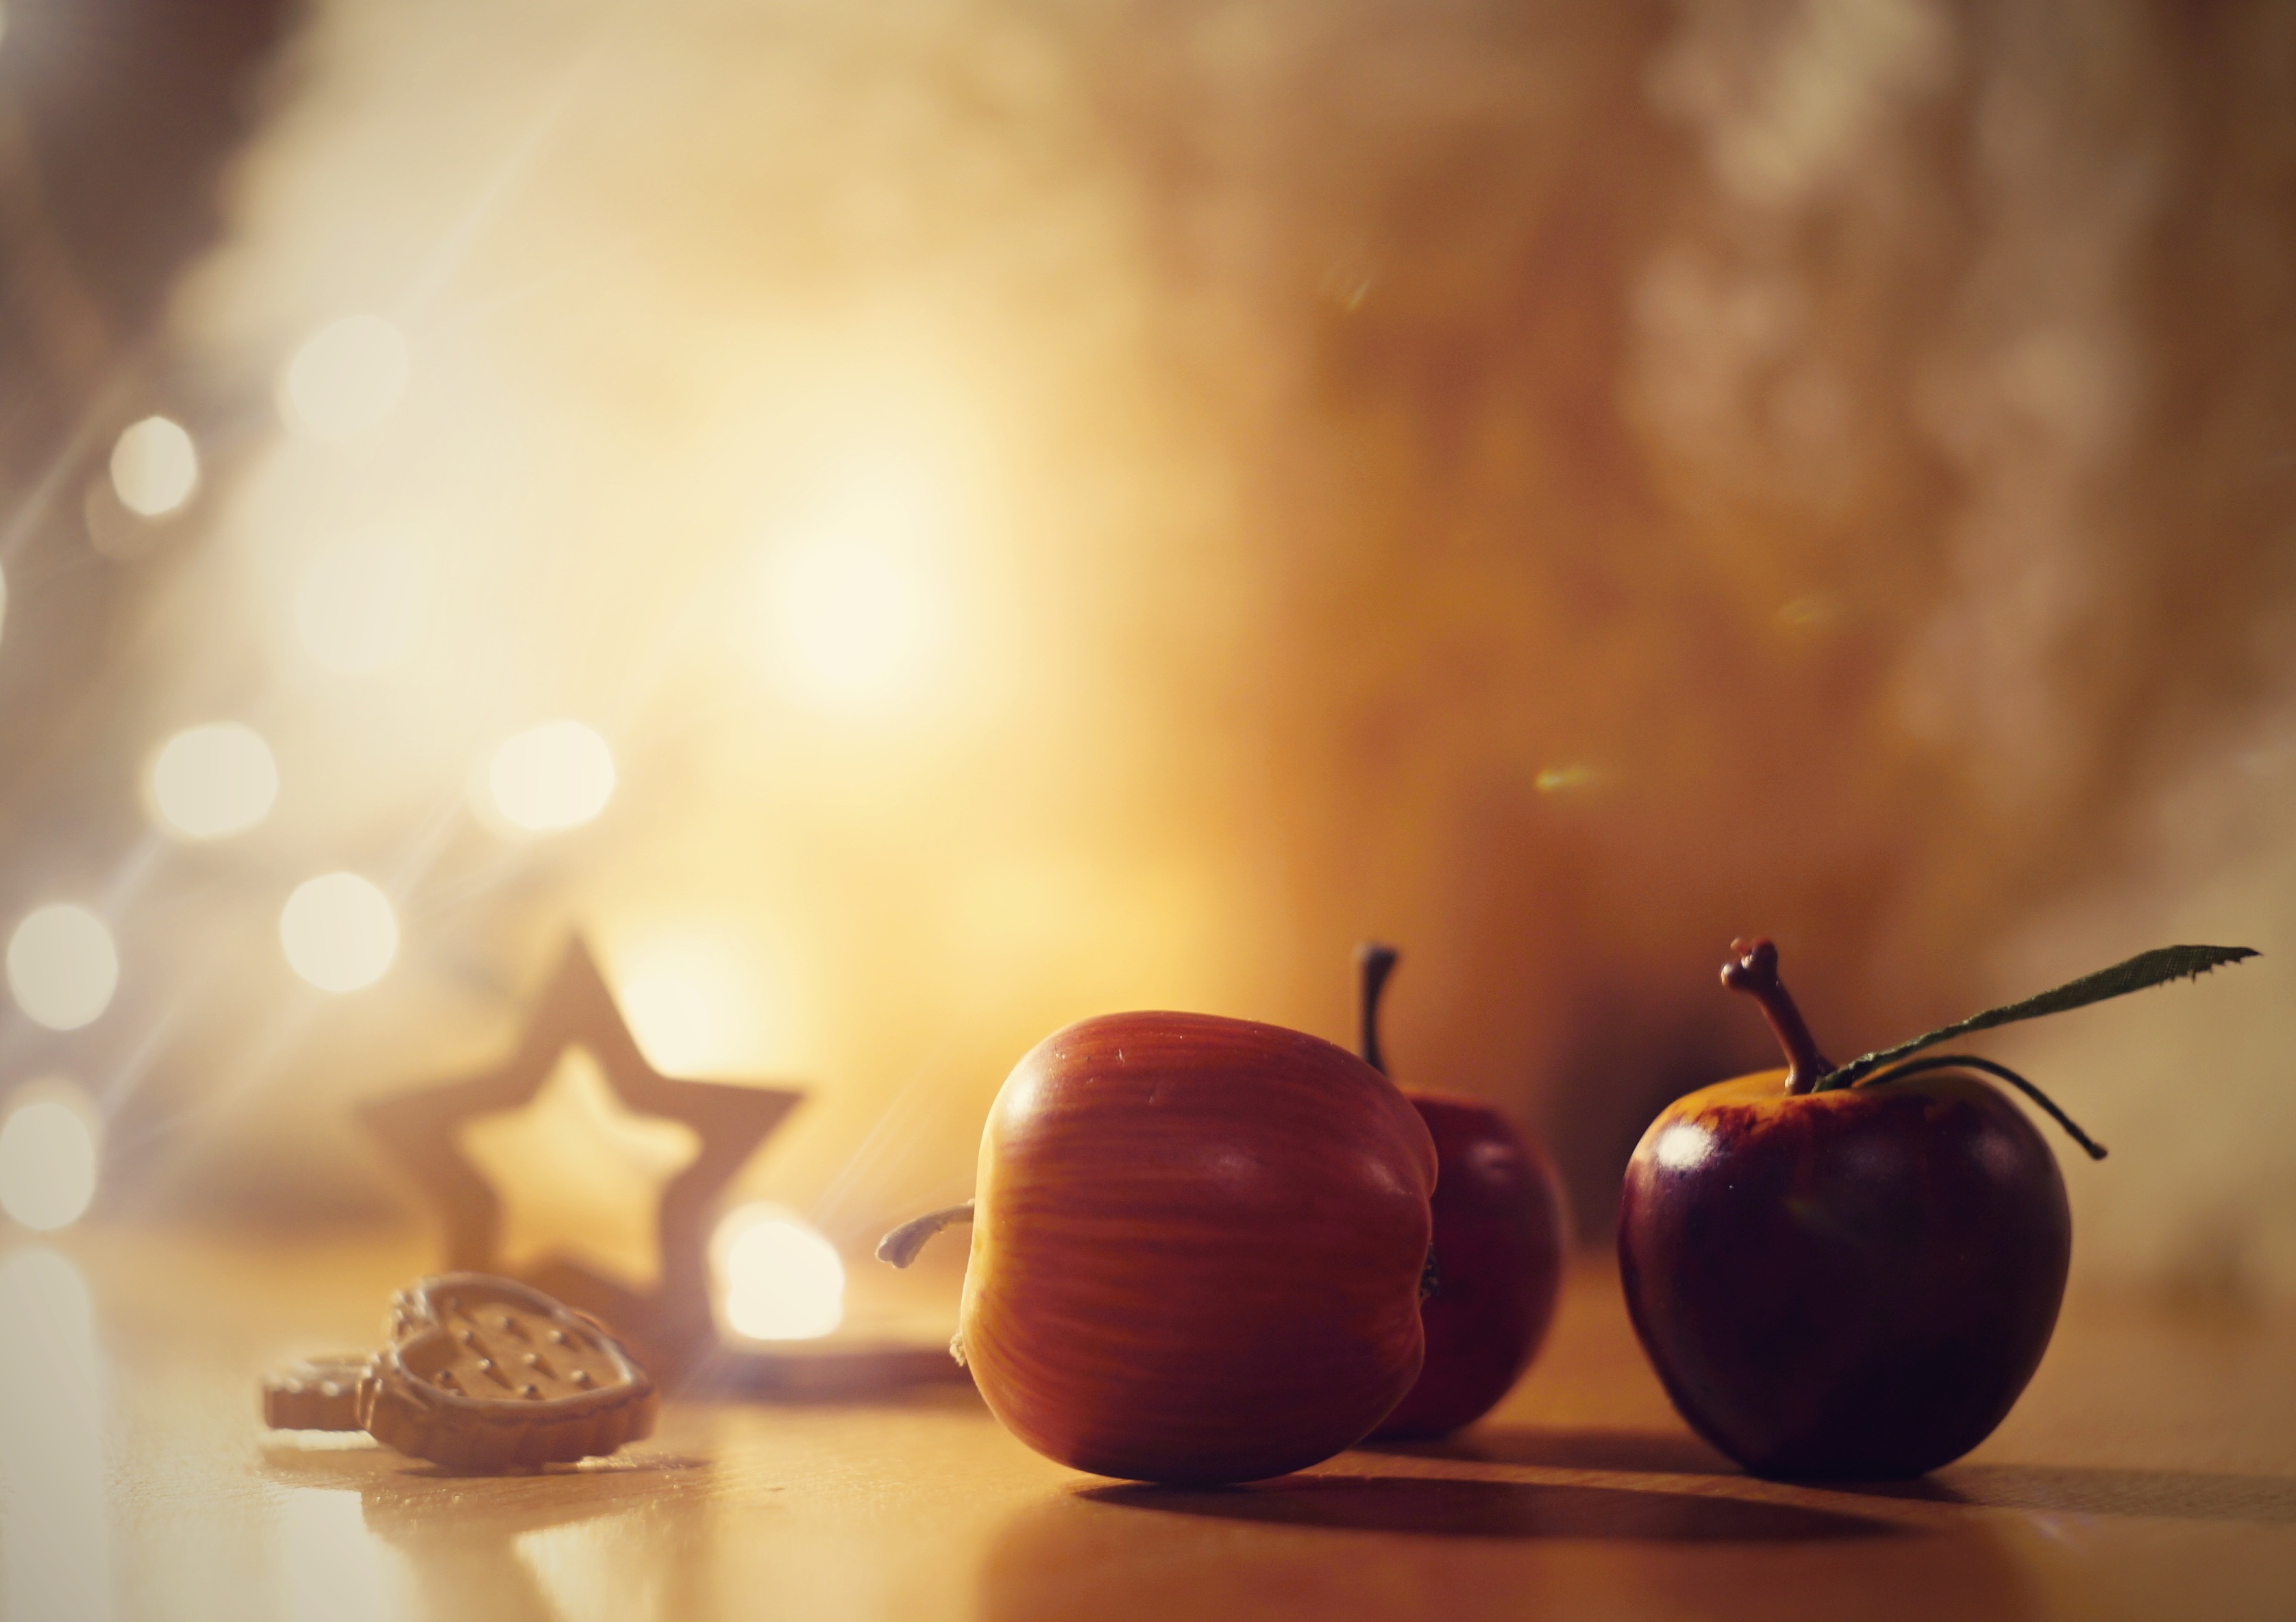 apples, holidays, cookies, christmas for Windows